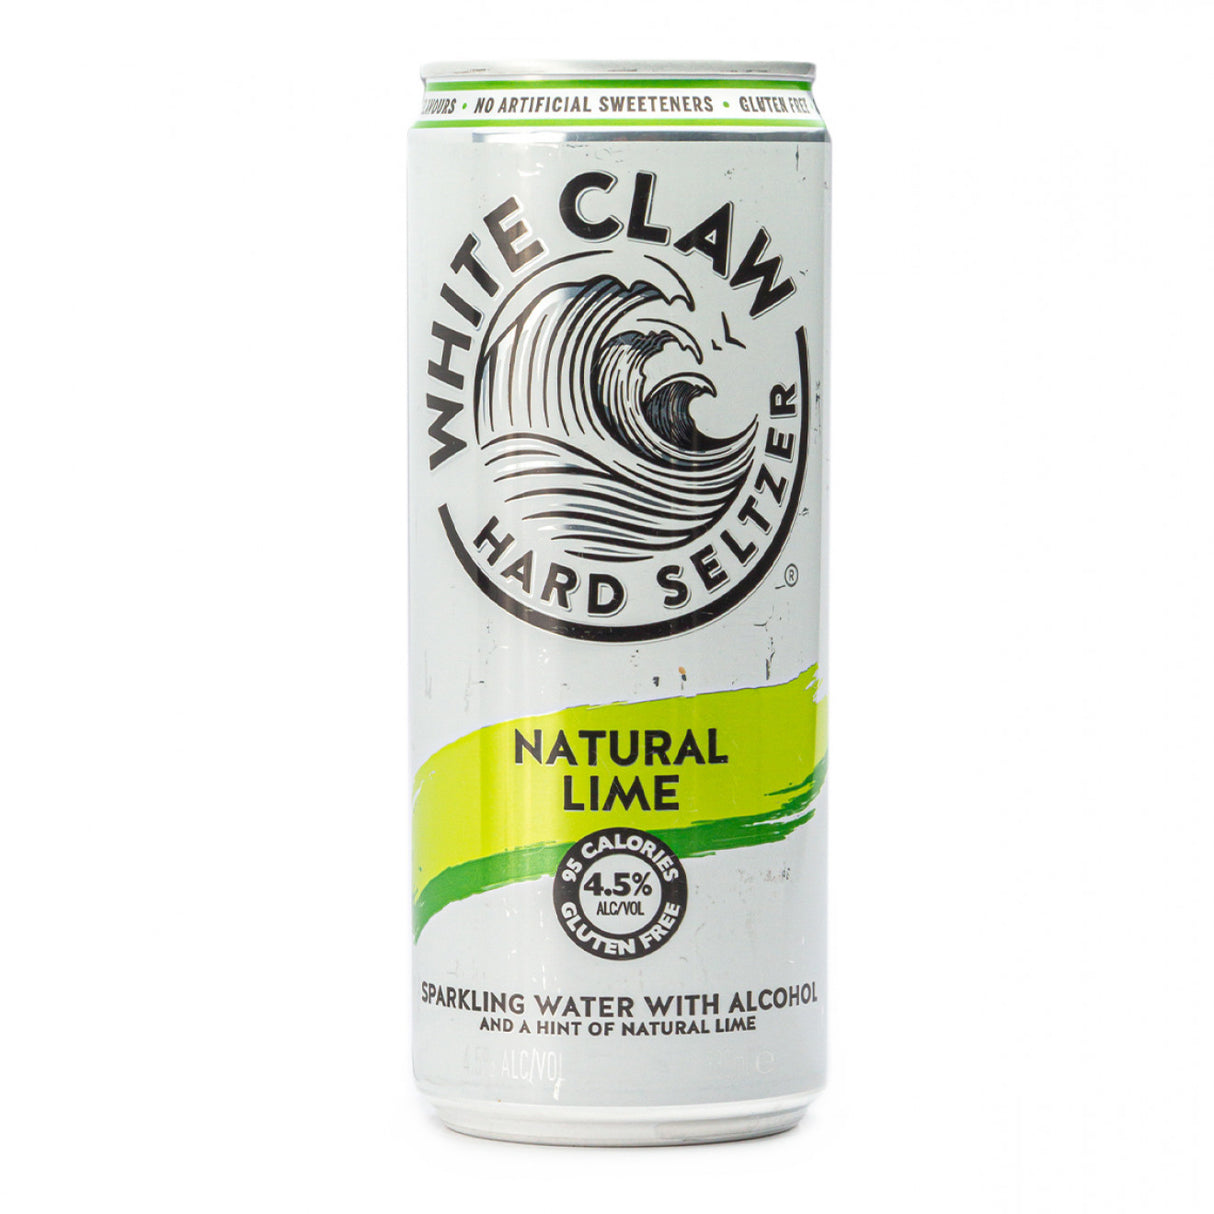 WHITE CLAW HARD SELTZER NATURAL LIME CANS (330ml) x 12